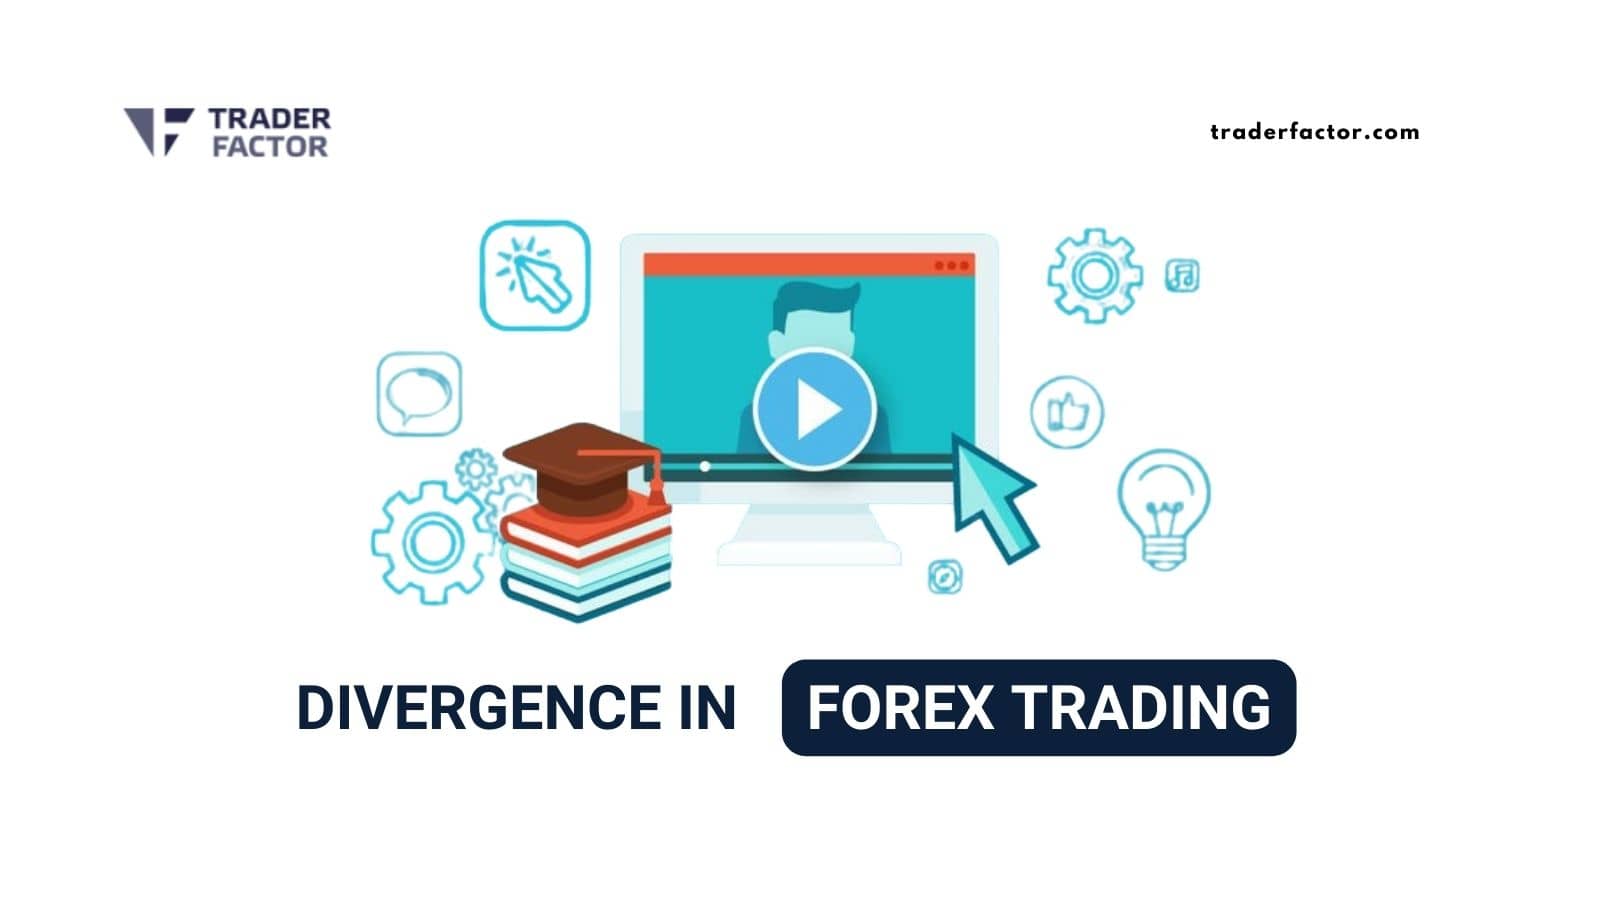 Divergence in Forex Trading